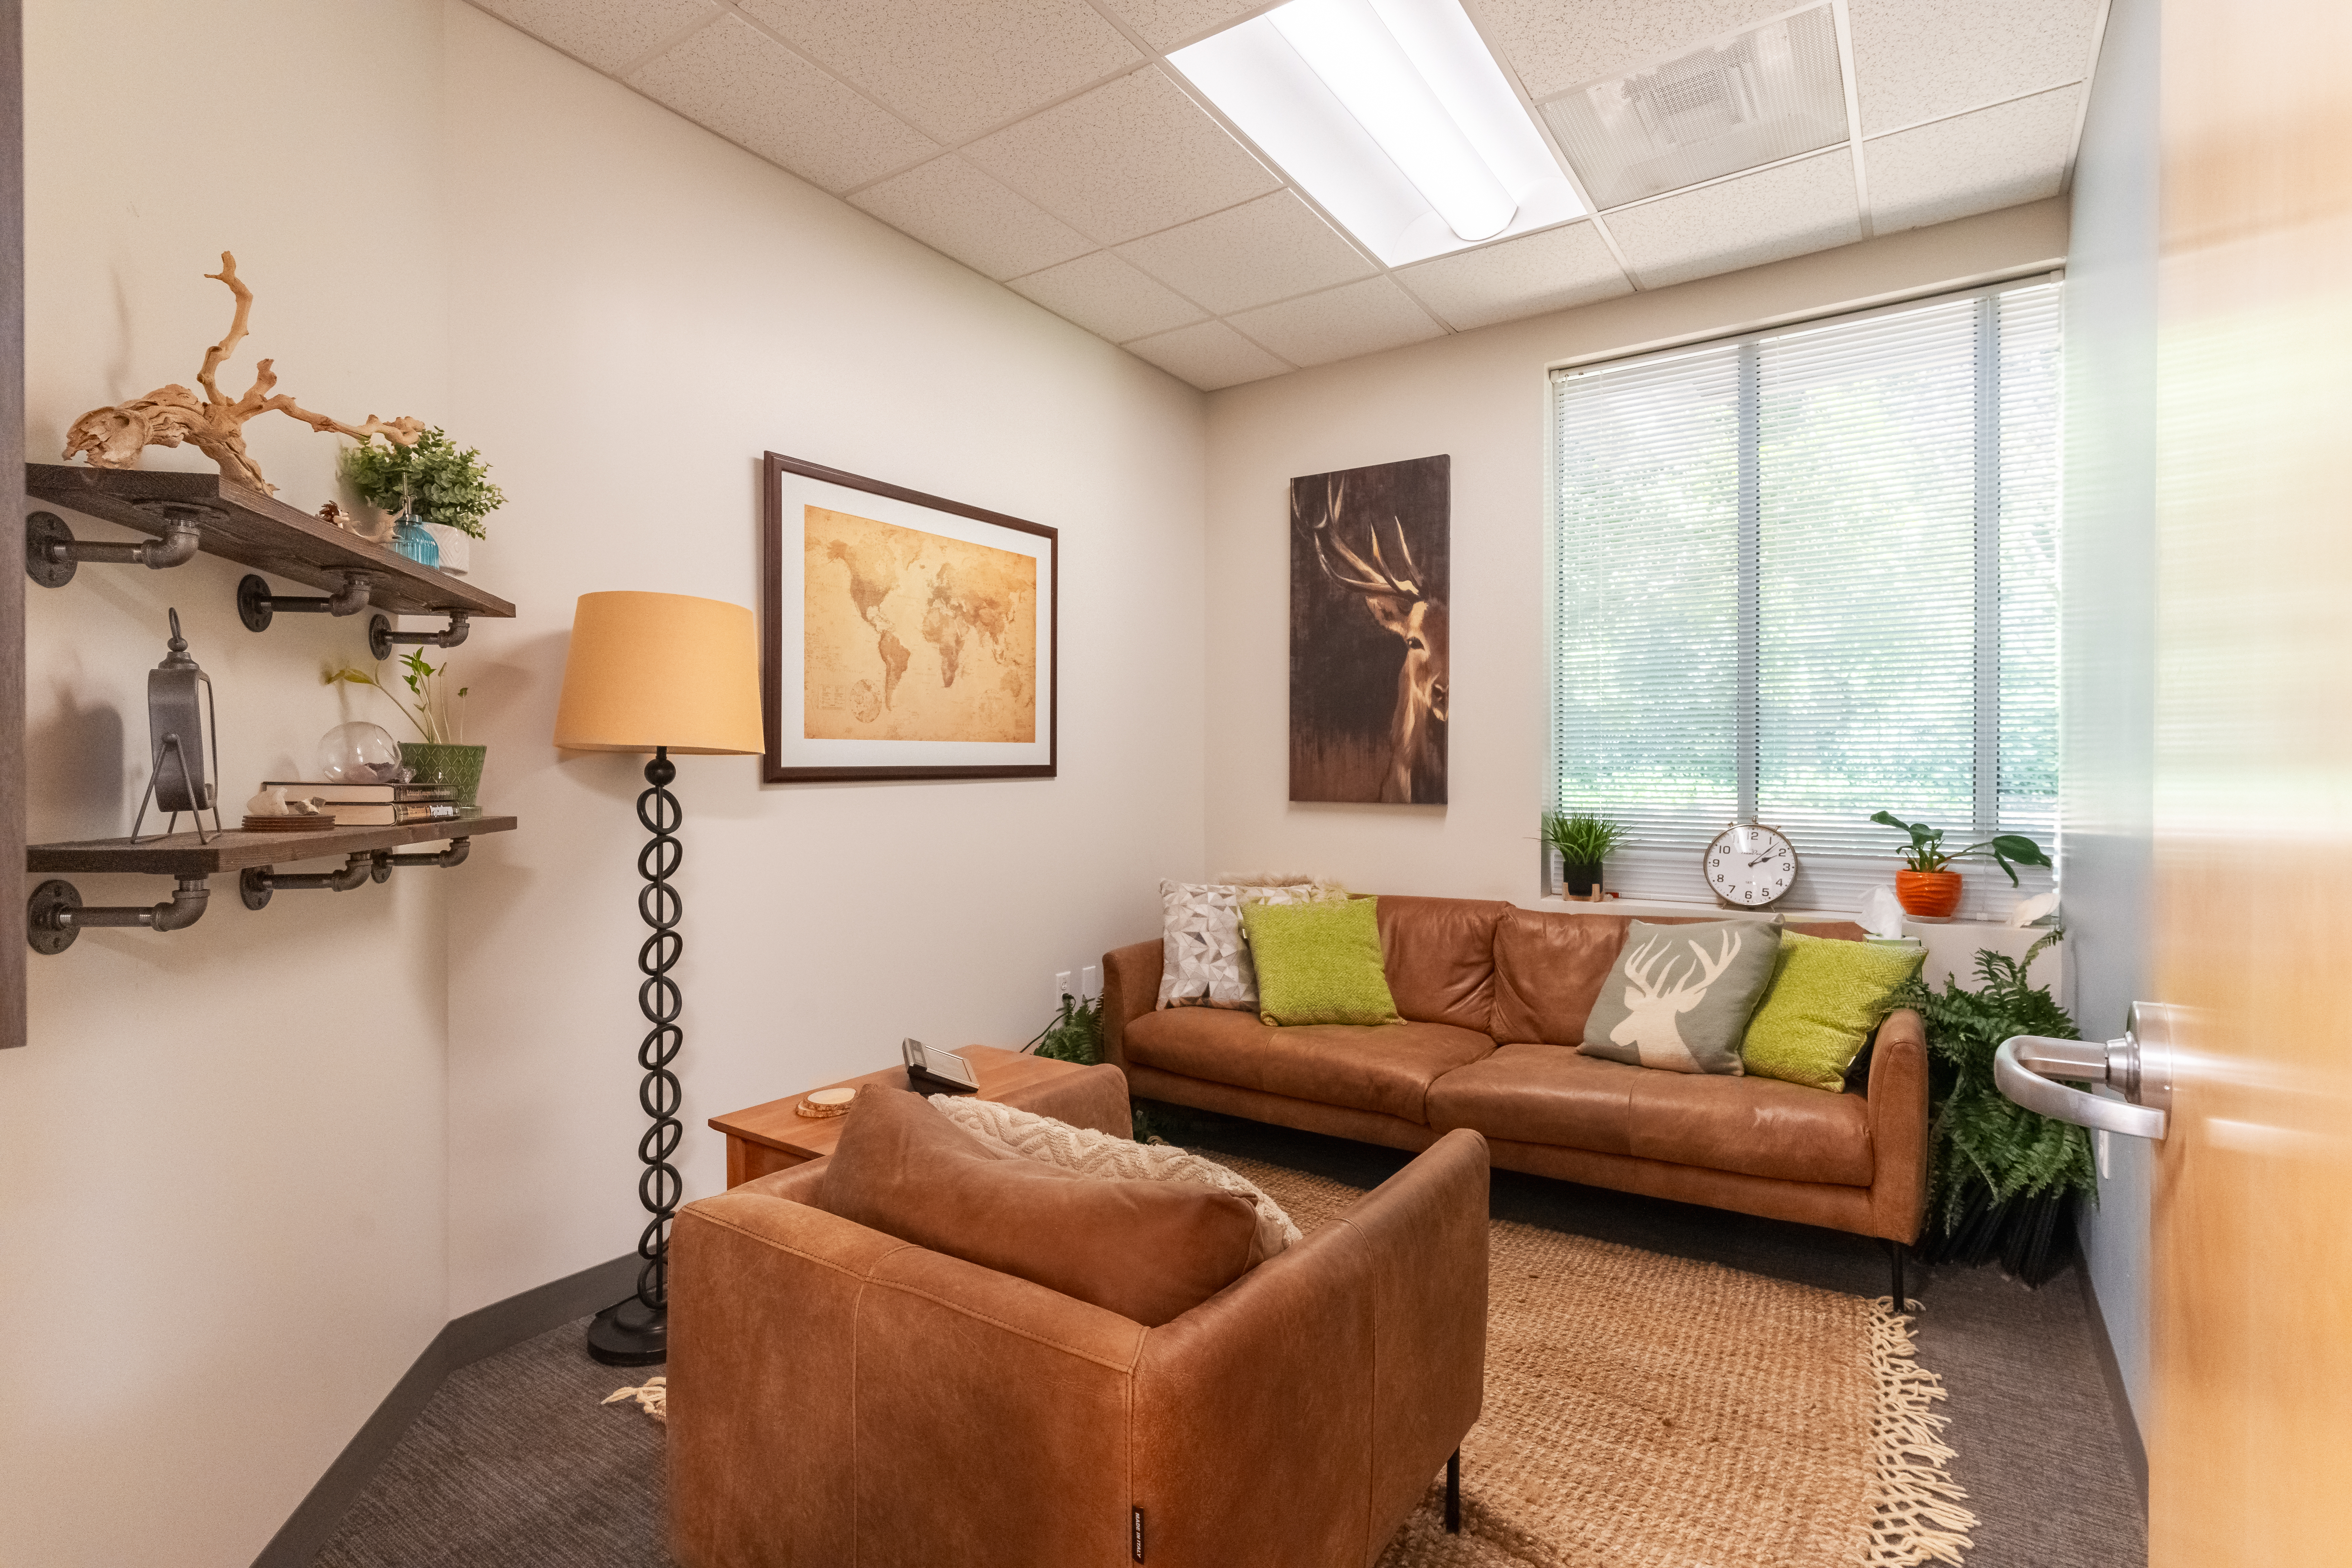 deer therapy session room at wellspring psychology